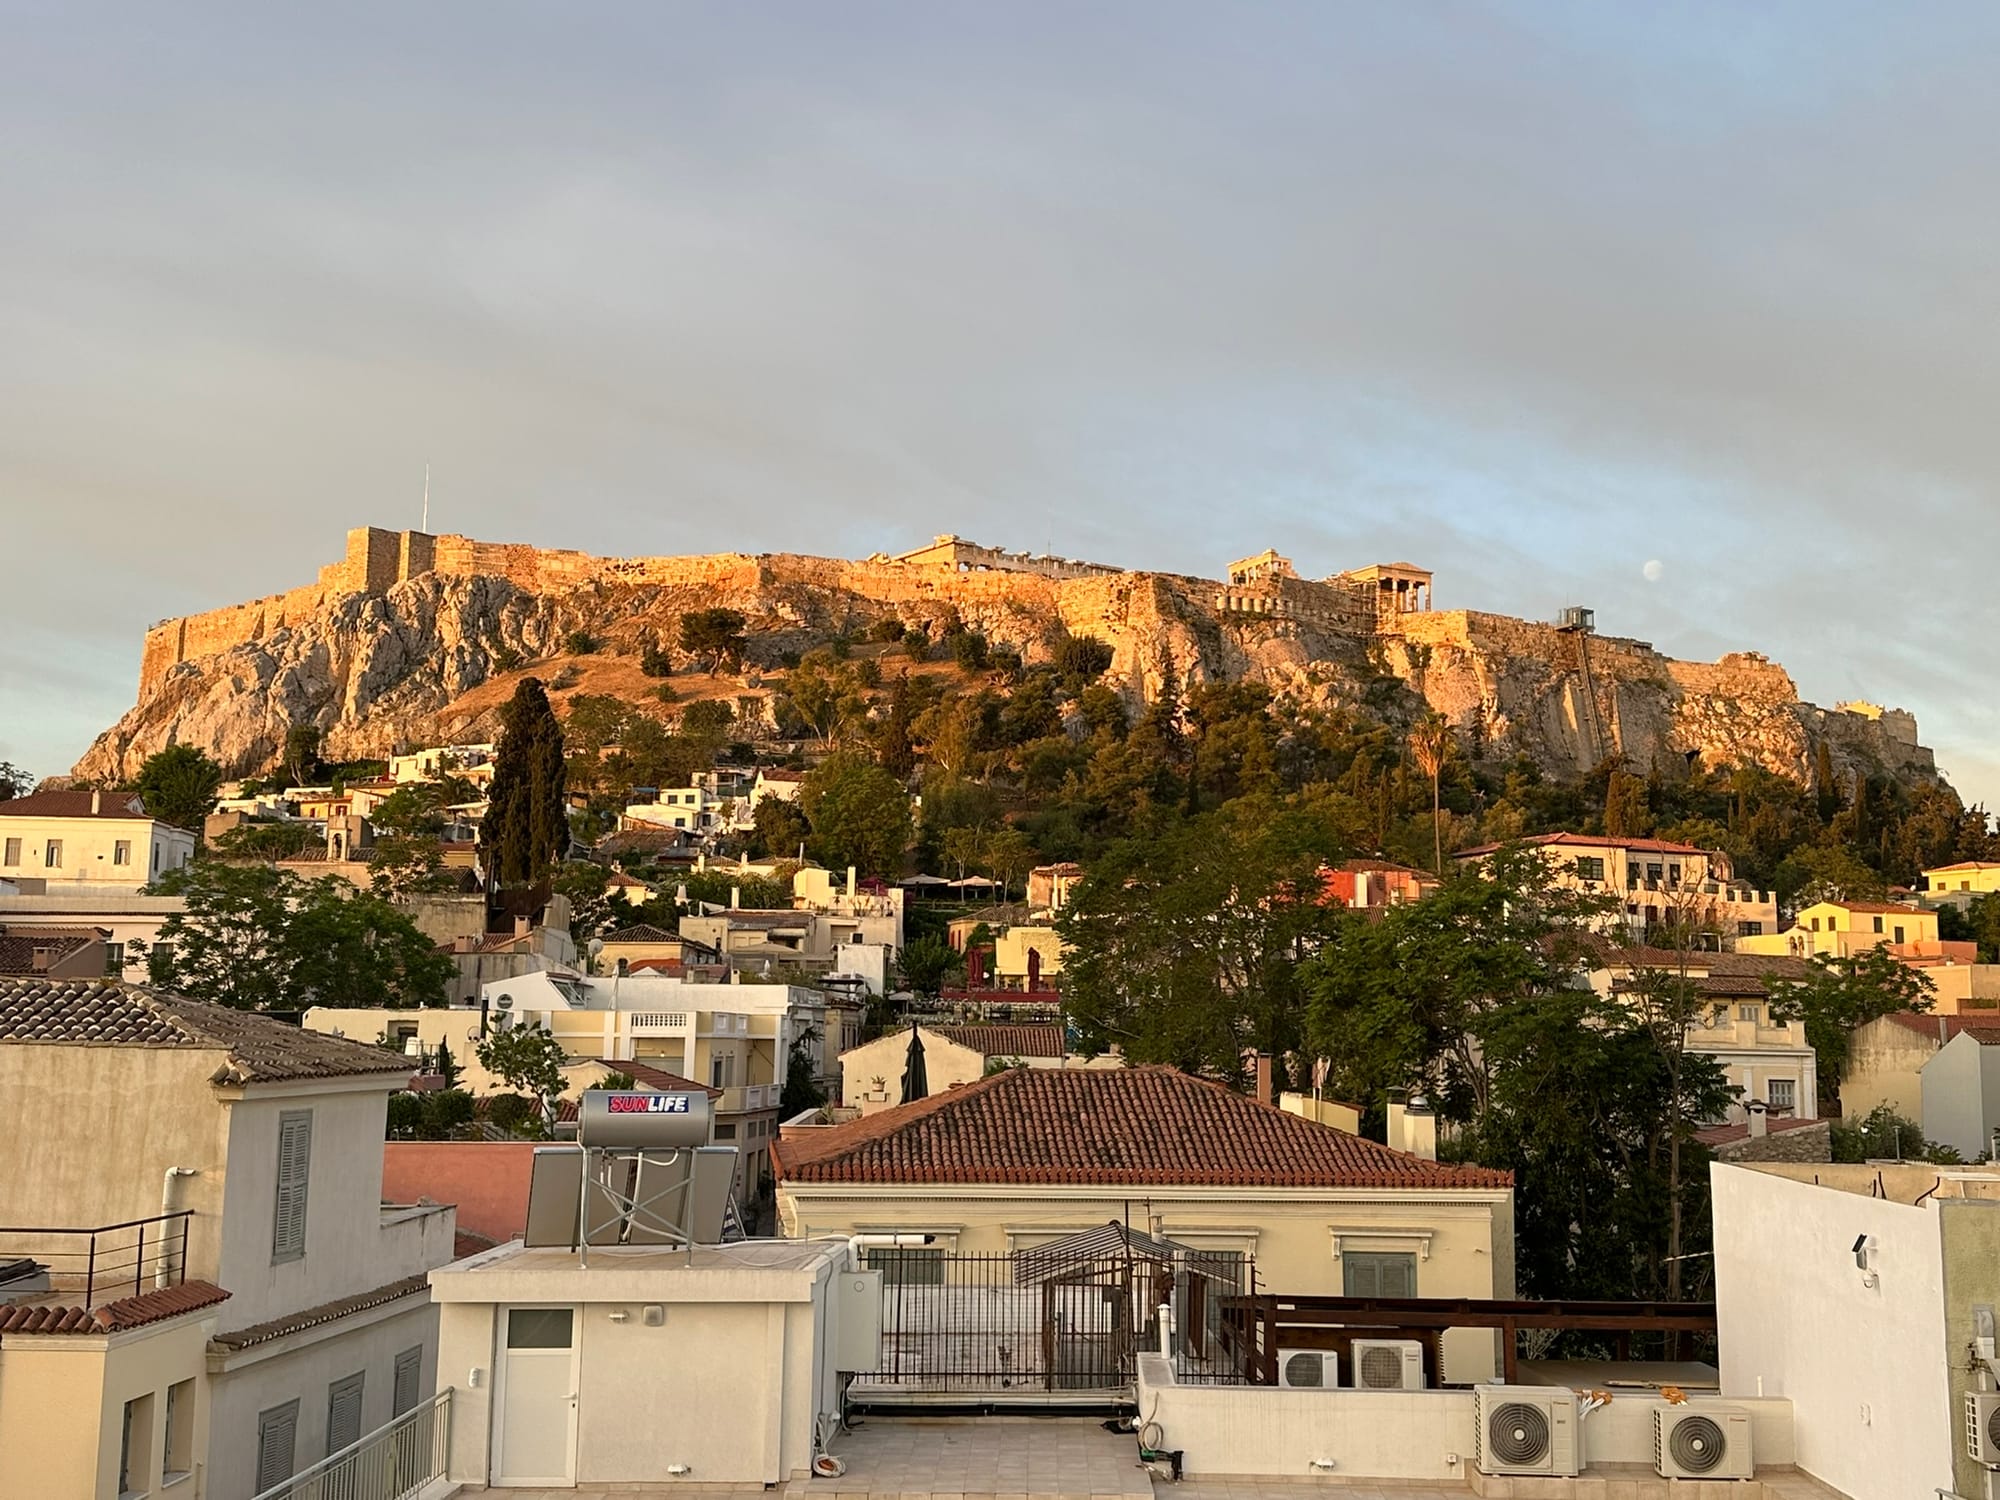 Back On My Grand Tour Bullshit: Impressions from Athens